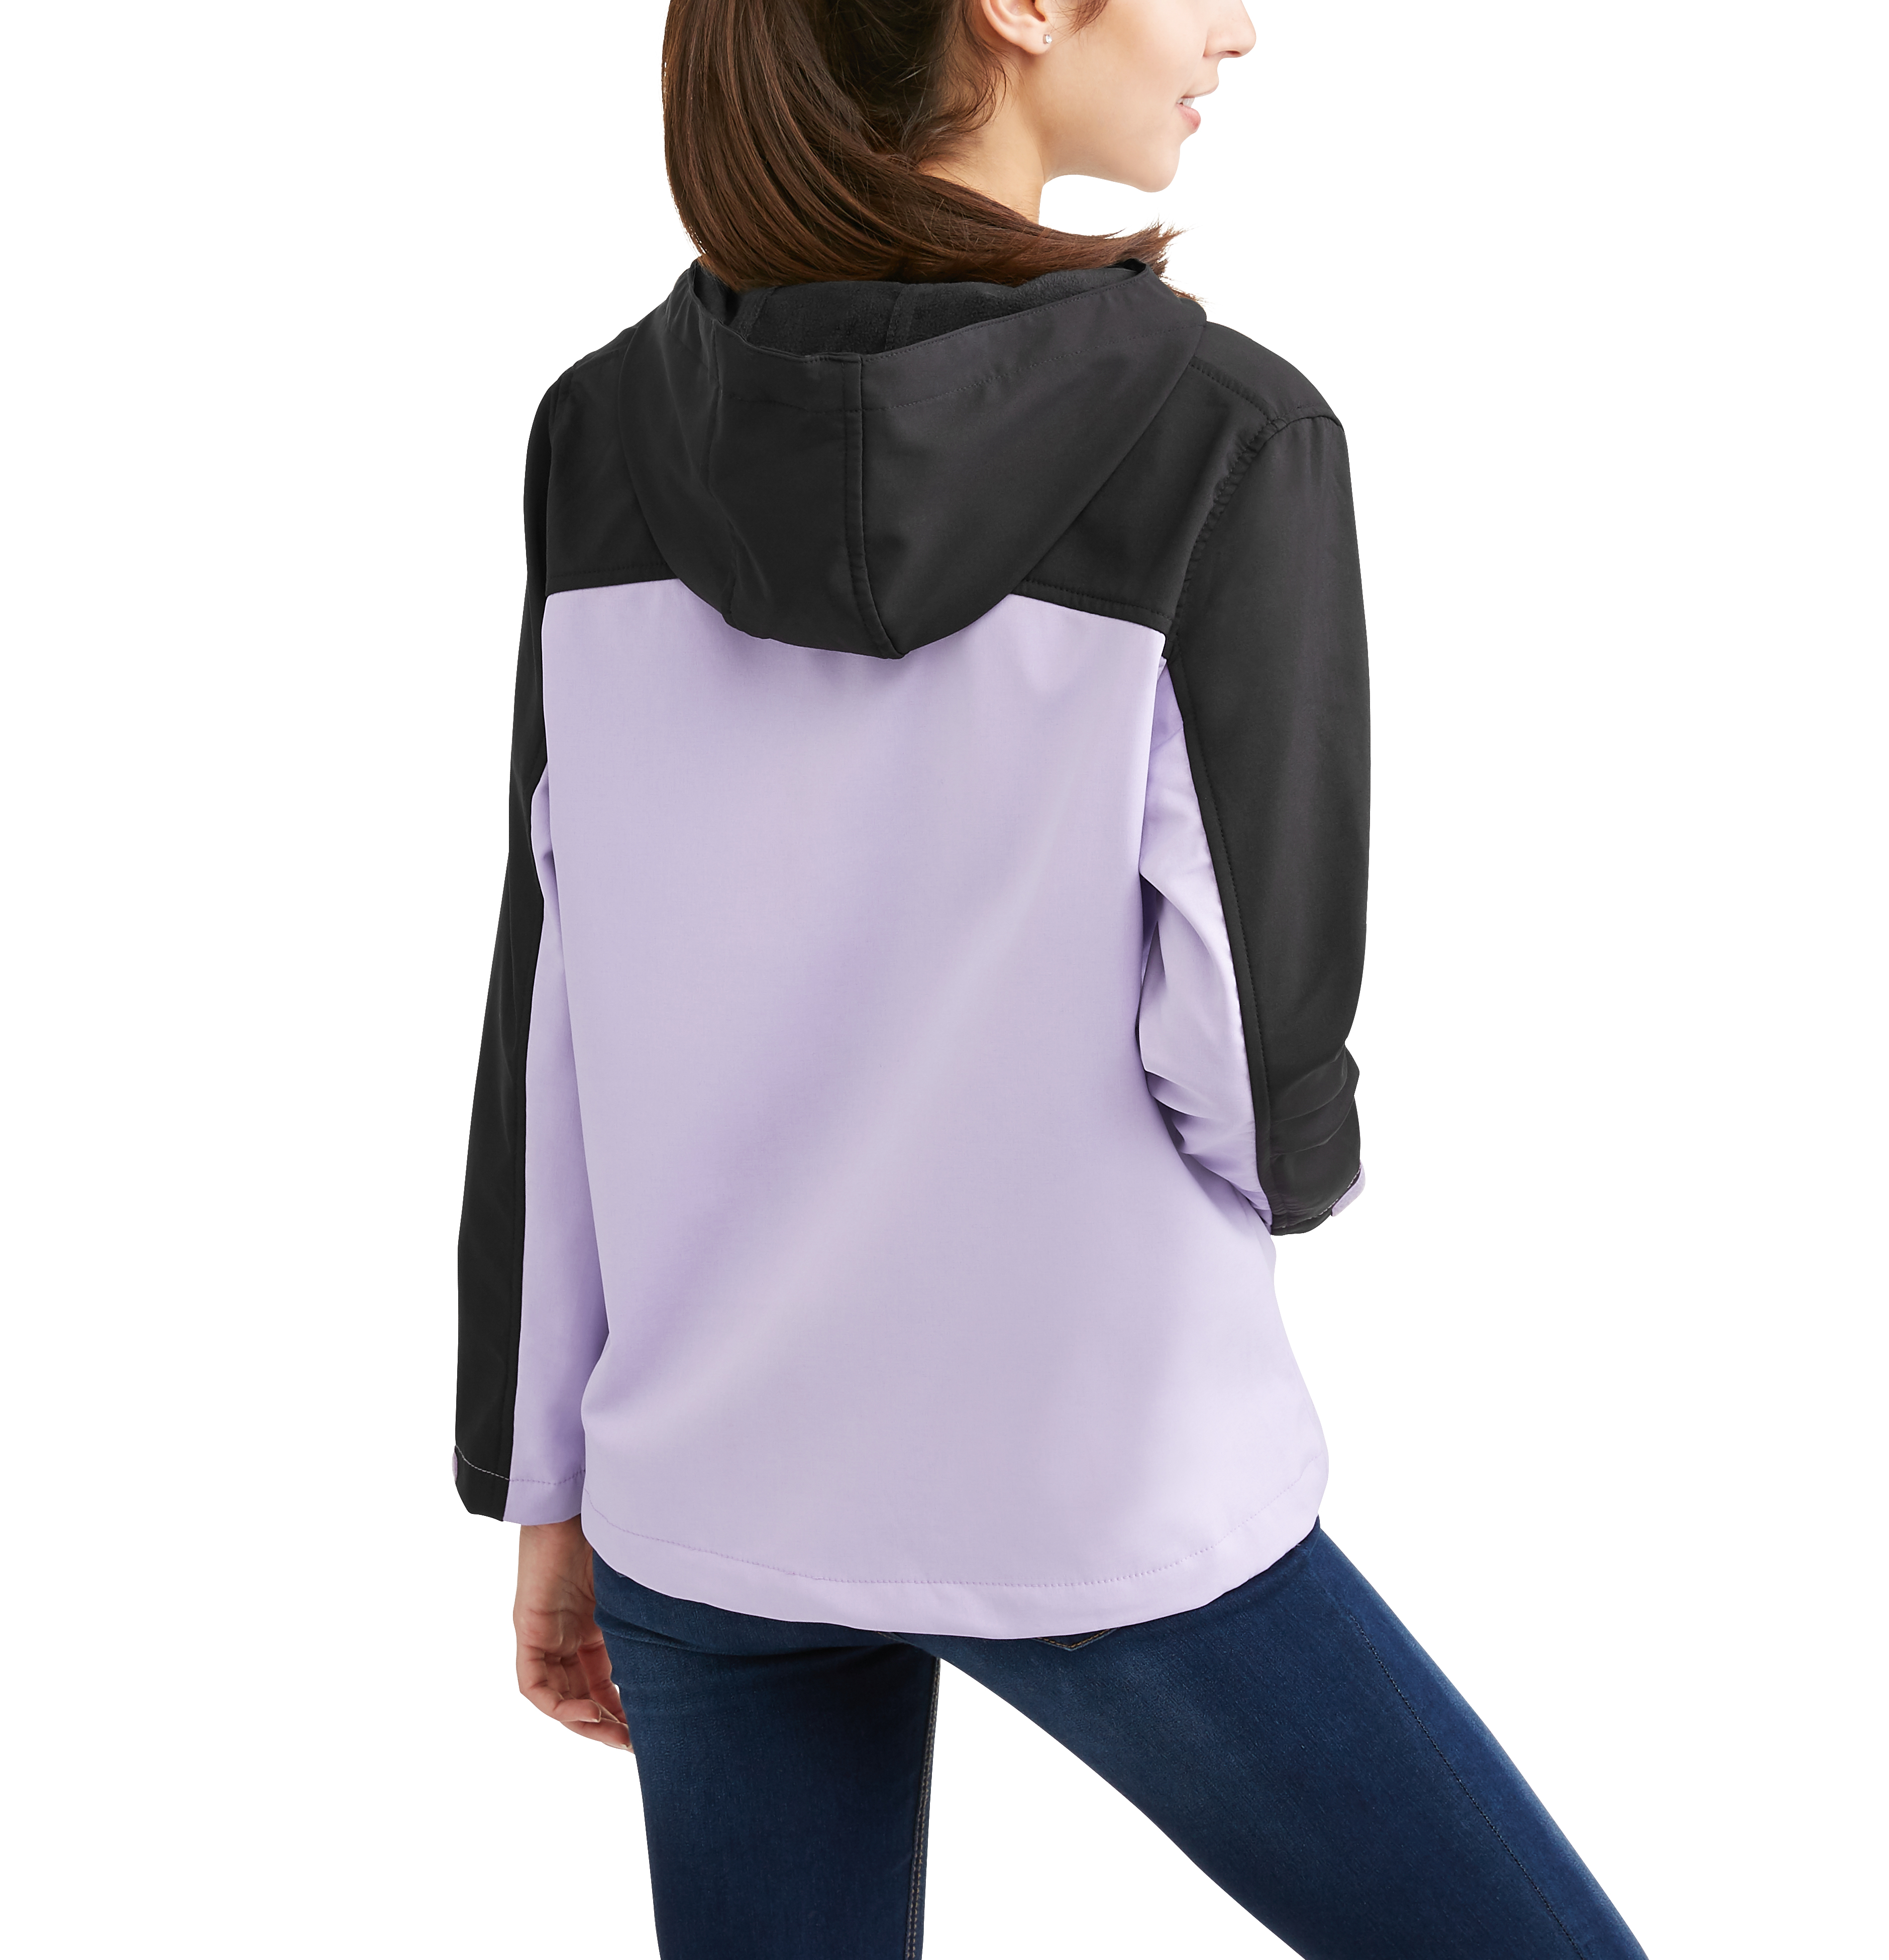 Climate Concepts Women's Colorblock Soft - image 2 of 2